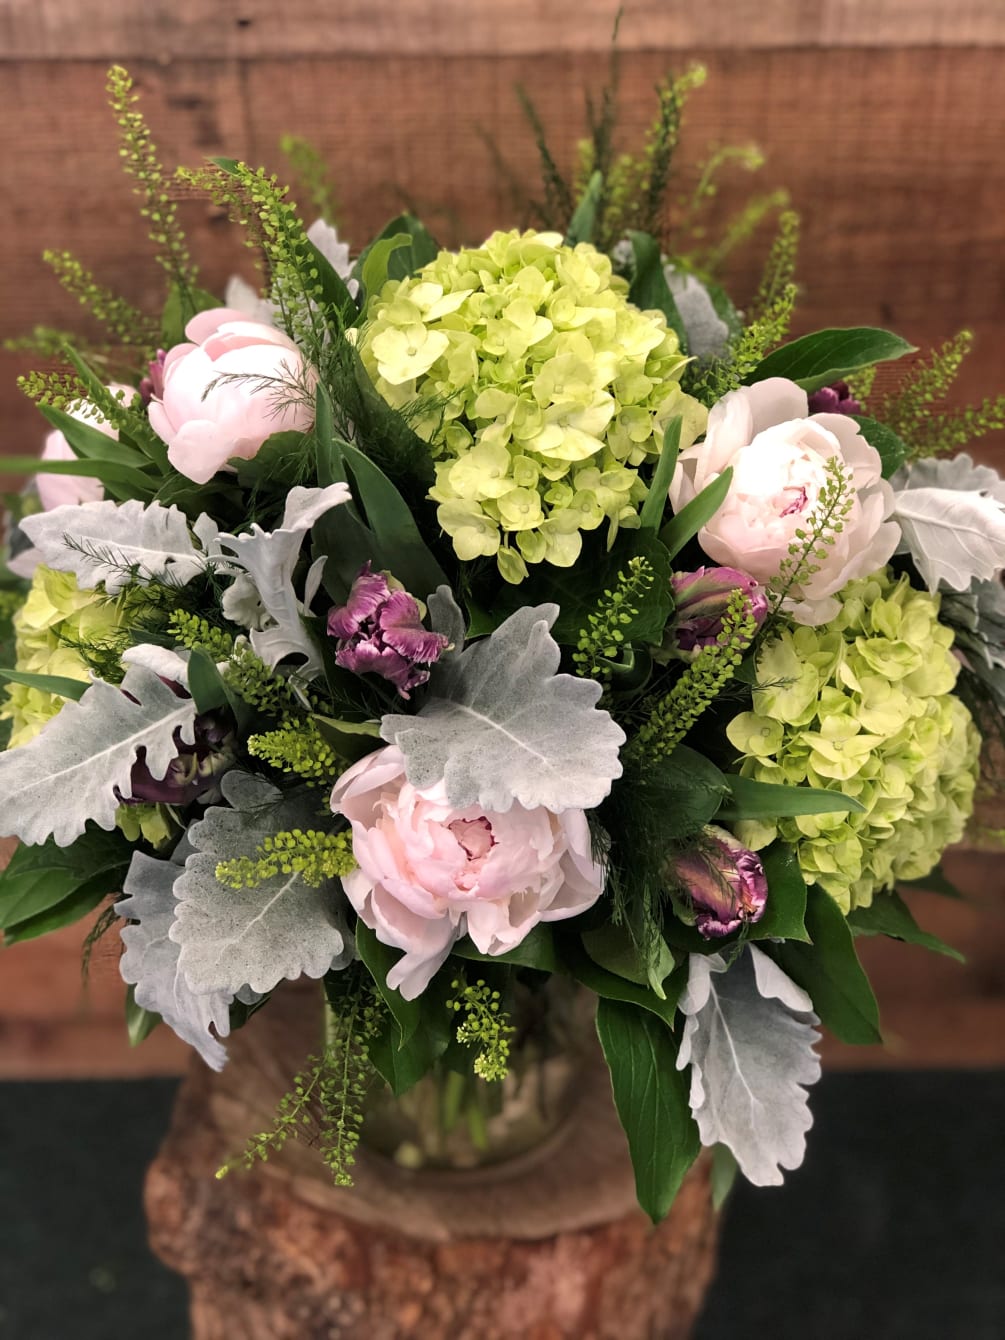 This serene garden style arrangement is perfect for any occasion. Fragrant Peonies